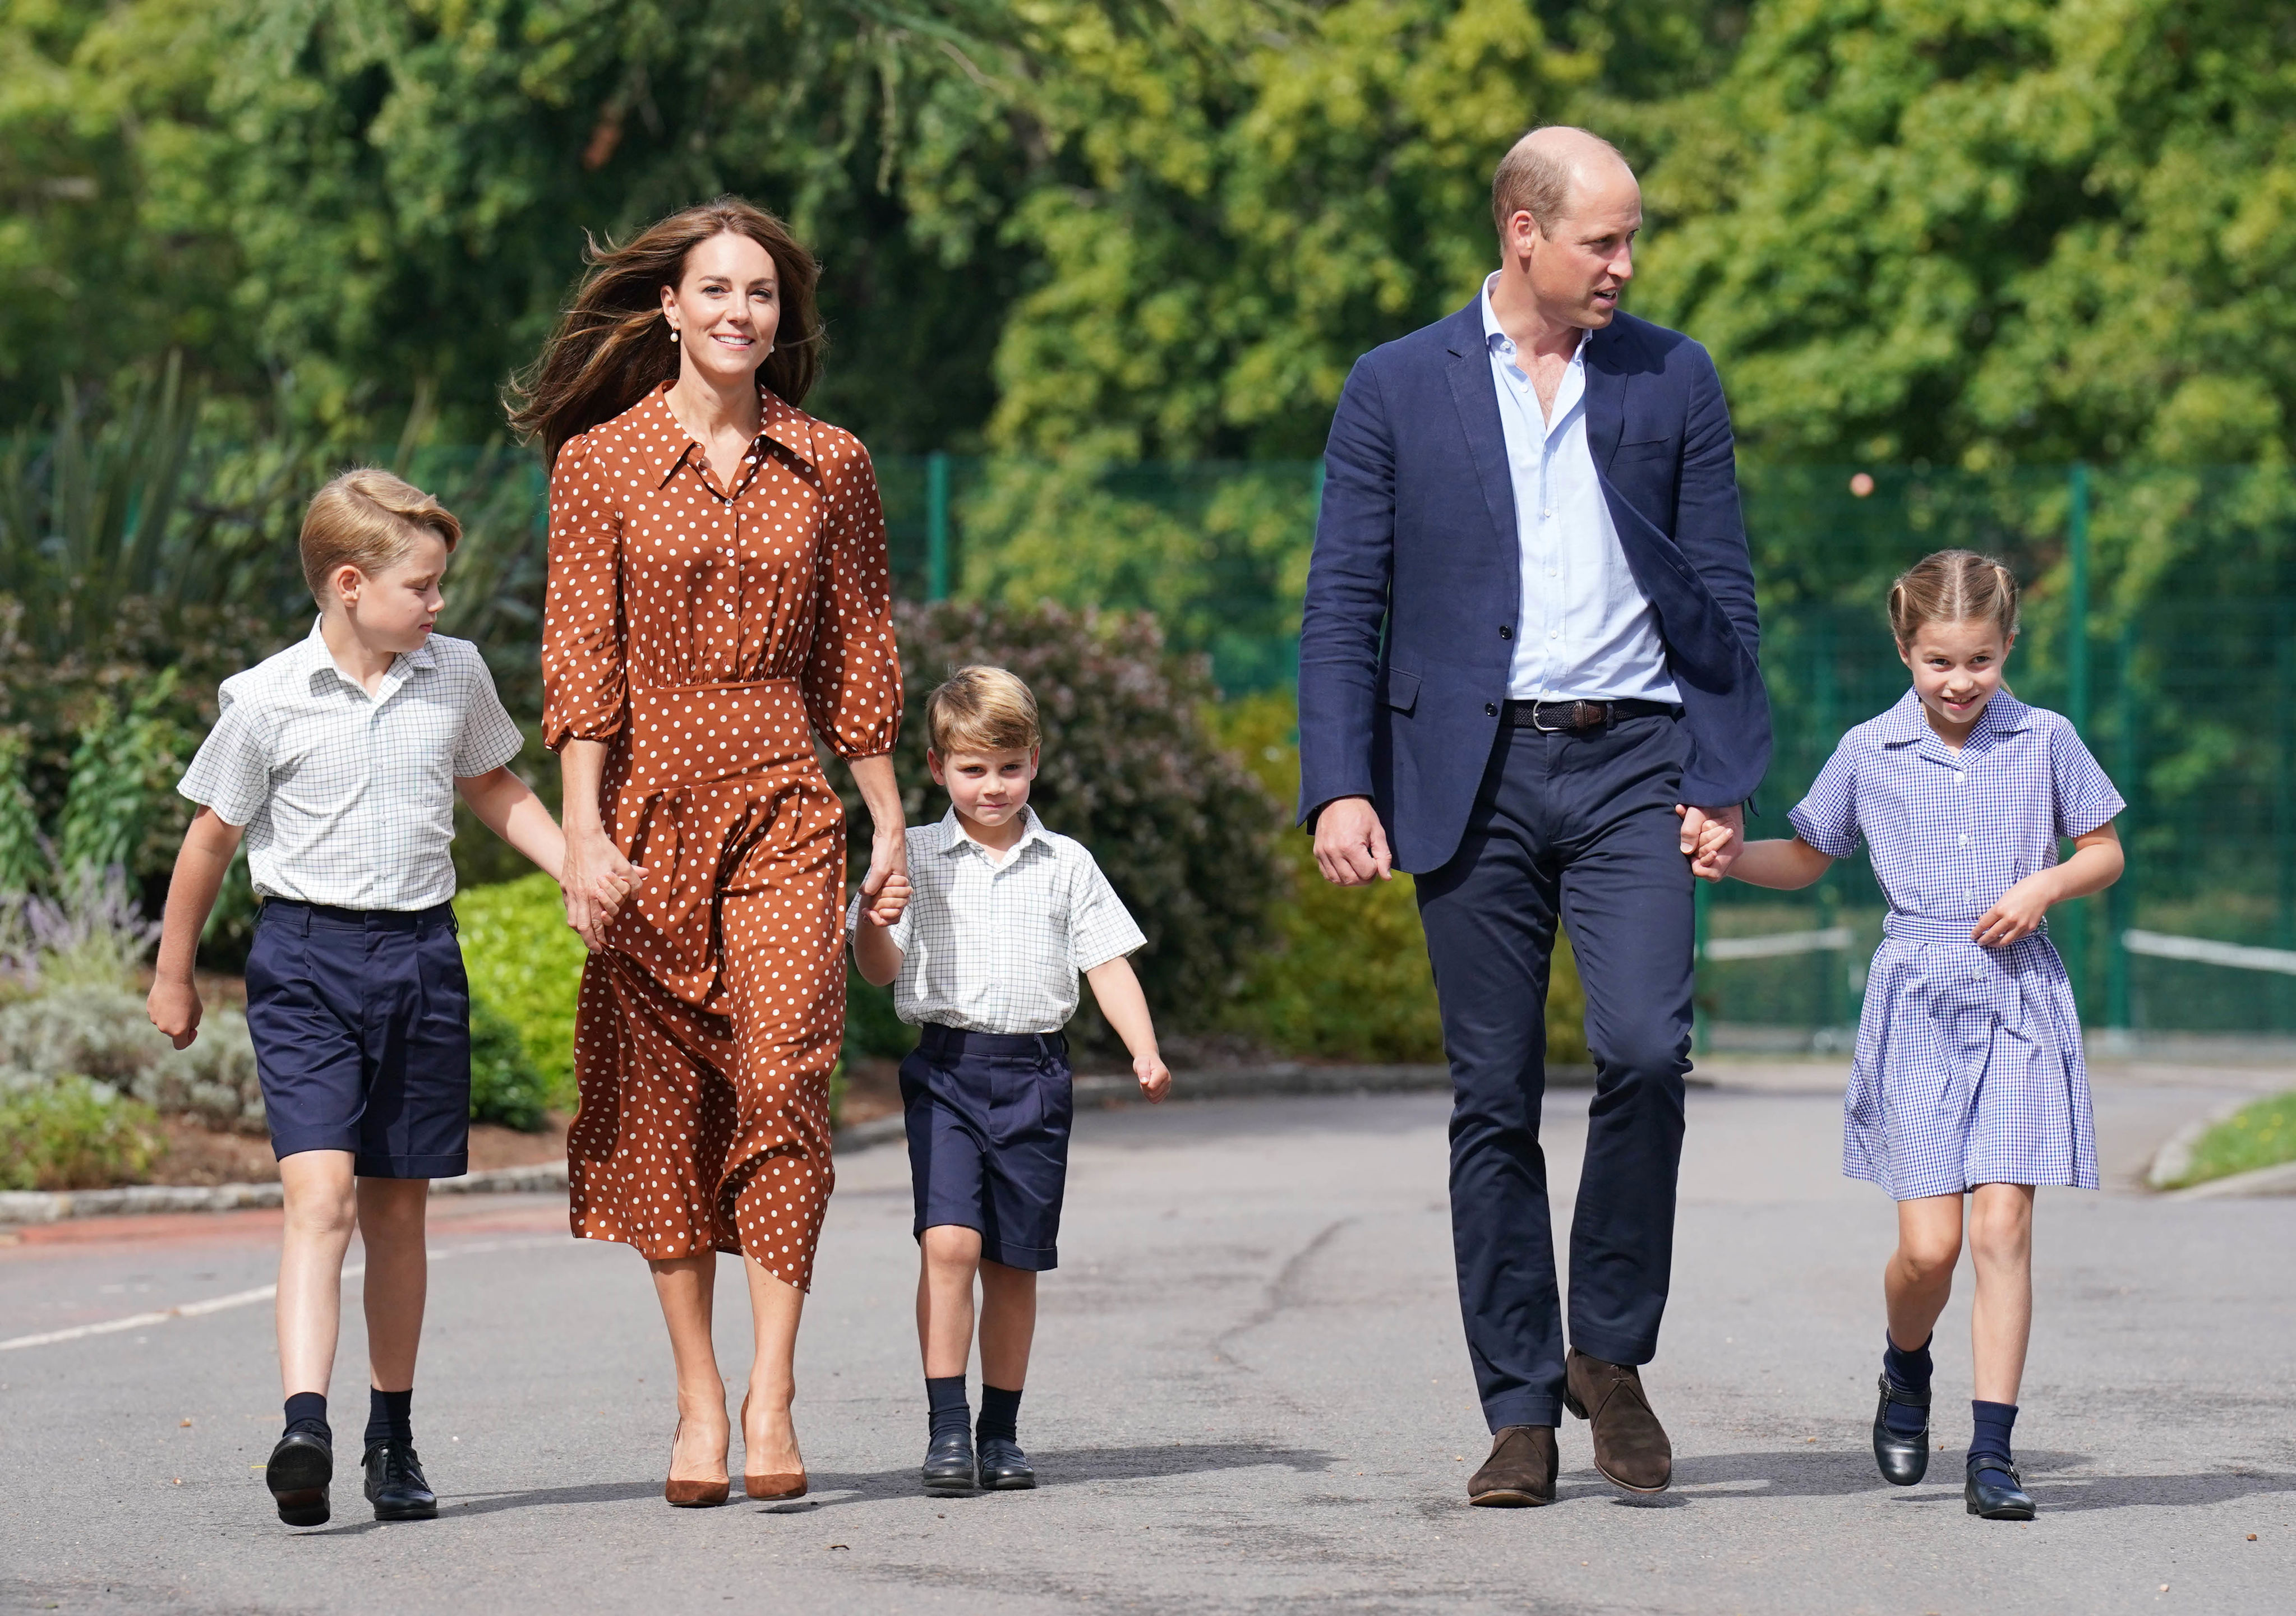 <p>Days after moving from London to a new home in Windsor, England, about an hour away, Prince George, Prince Louis and Princess Charlotte -- accompanied by parents William and Kate just one day before they became the new Prince and Princess of Wales upon <a href="https://www.wonderwall.com/celebrity/royals/best-photos-from-queen-elizabeth-ii-funeral-king-charles-princes-william-prince-harry-george-charlotte-kate-meghan652347.gallery">the death</a> of Queen Elizabeth II and the accession of King Charles III -- headed to a settling-in afternoon at their new school, Lambrook School near Ascot in England's Berkshire region, on Sept. 7, 2022. The settling-in afternoon is an annual event held to welcome new student and their families to Lambrook and takes place the day before the start of the new school term. </p>